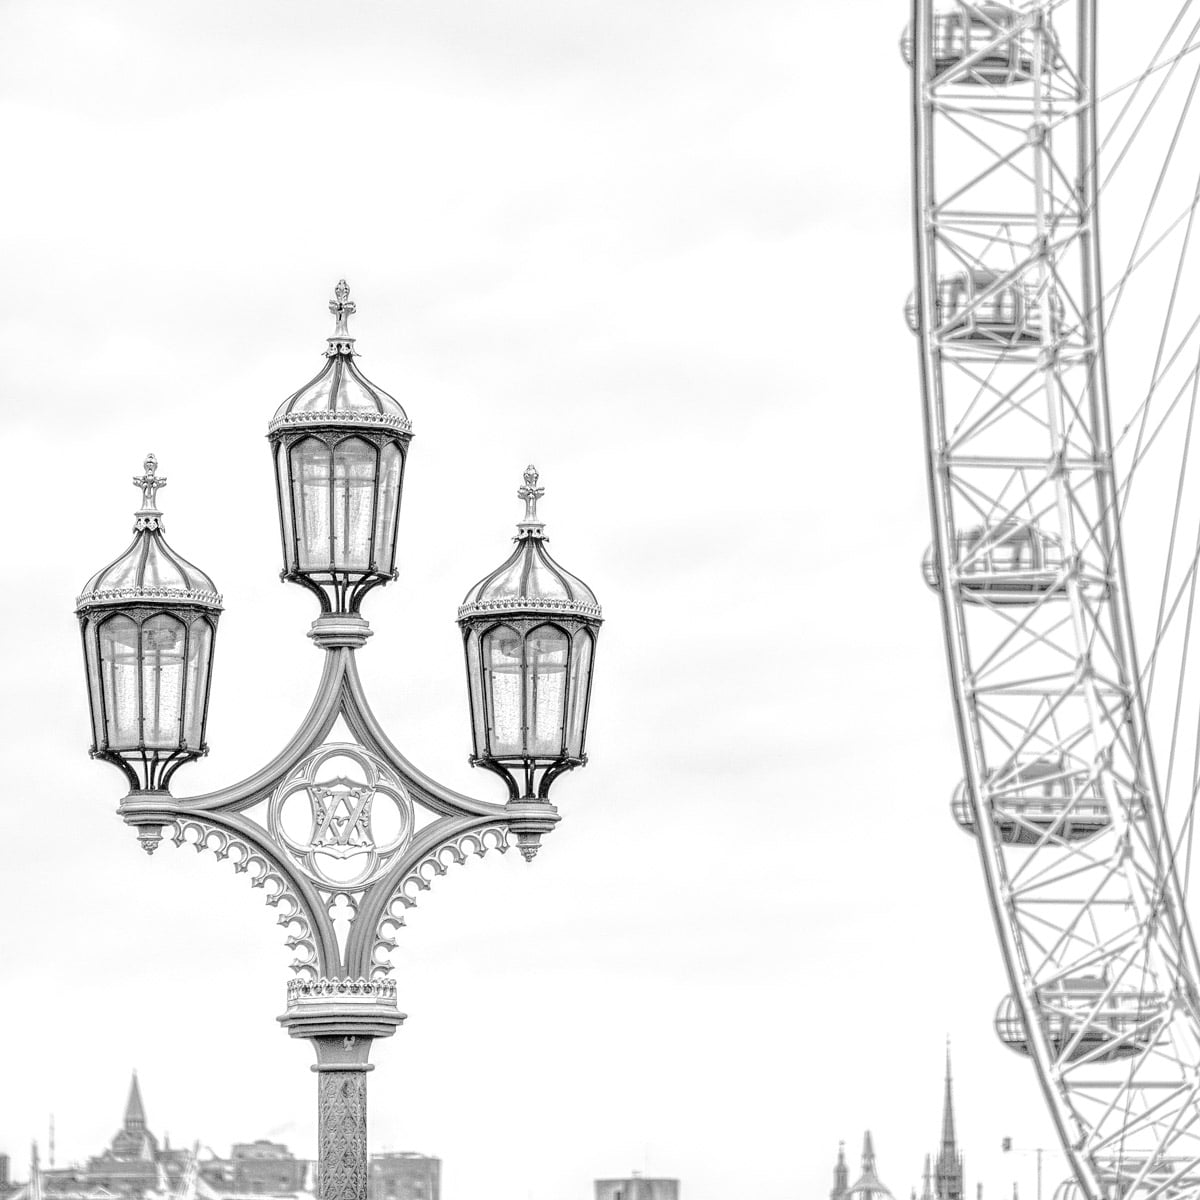 The Victorian style of this street light on the Westminster Bridge contrasts with the aggressively modern London Eye observation wheel in this high-key composition.